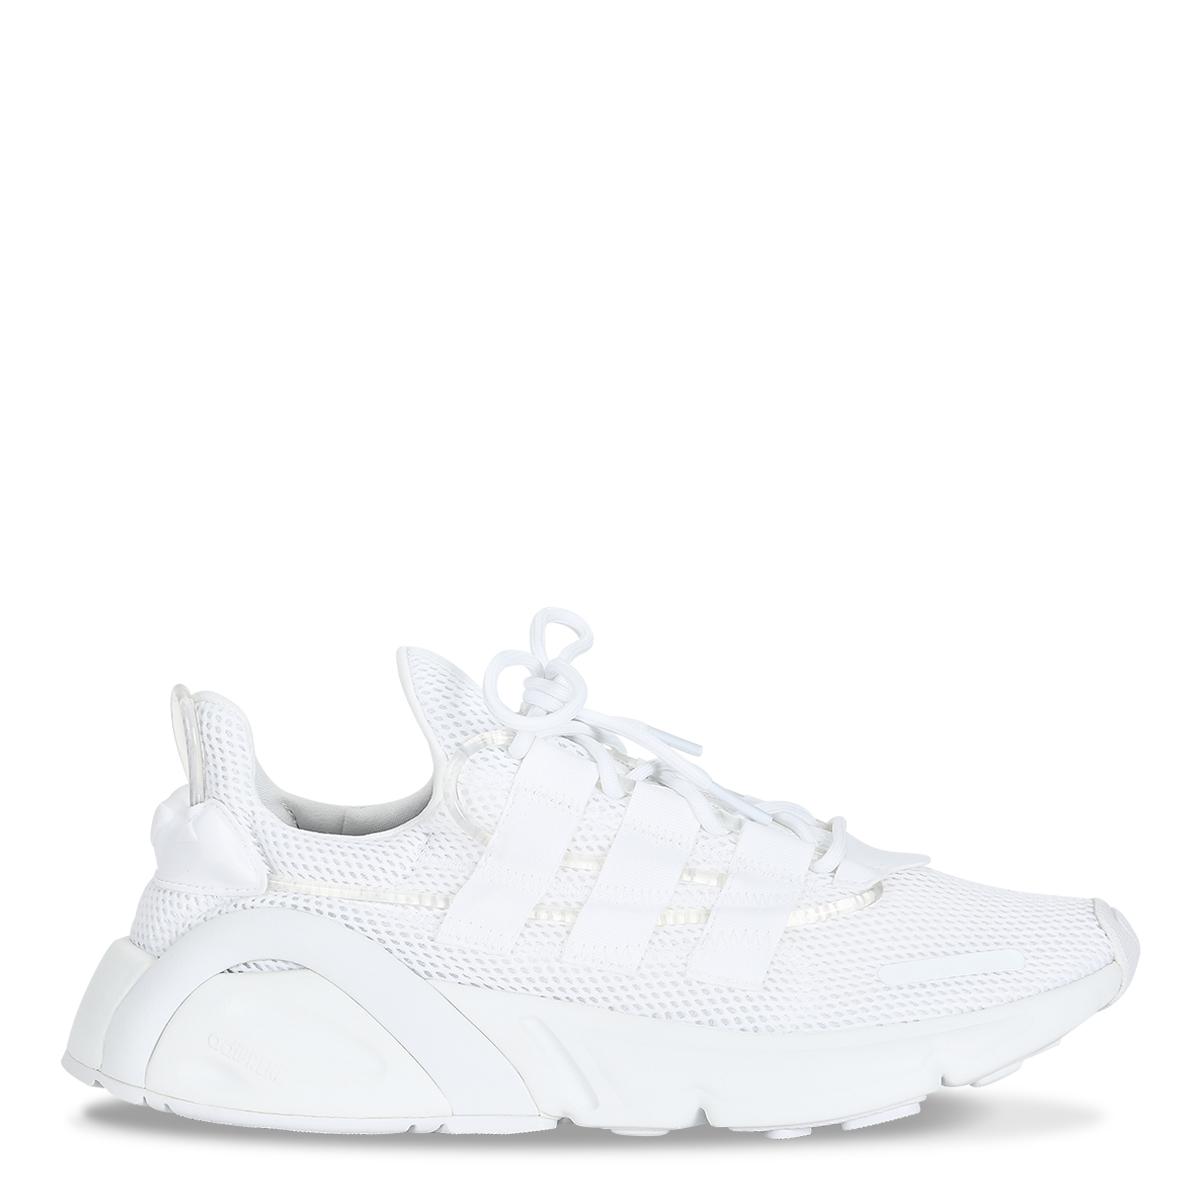 Critical technical Fifty adidas Originals Lx Adiprene White Sneakers for Men | Lyst